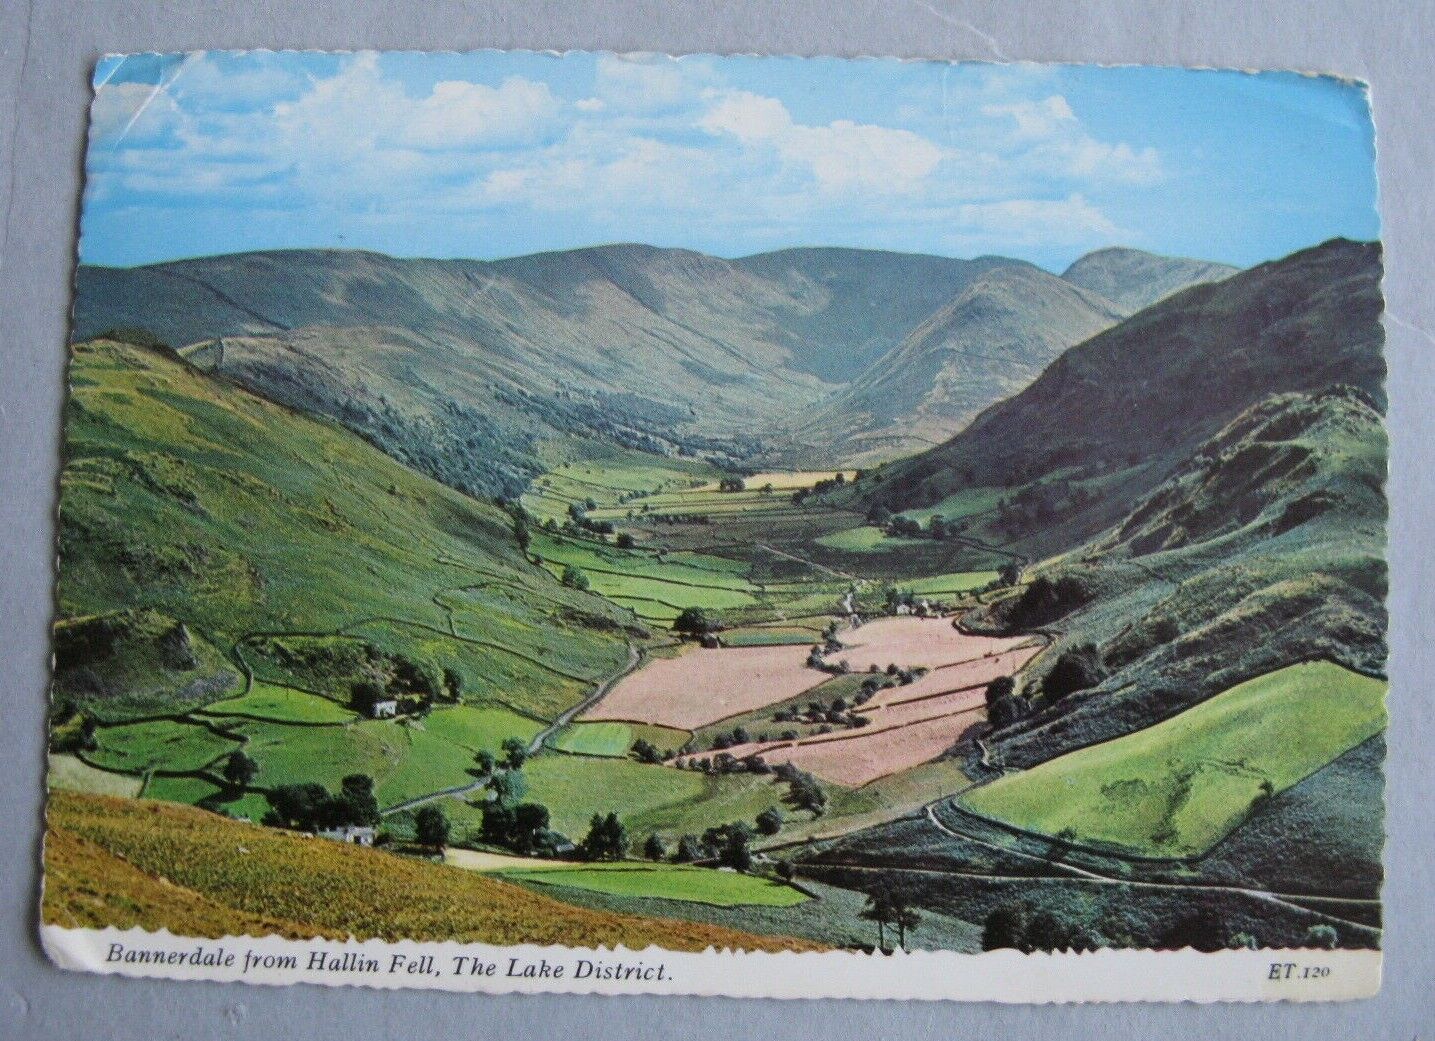 House Clearance - BANNERDALE FROM HALLIN FELL LAKE DISTRICT POST CARD  6'' X 4'' (LOT 99)